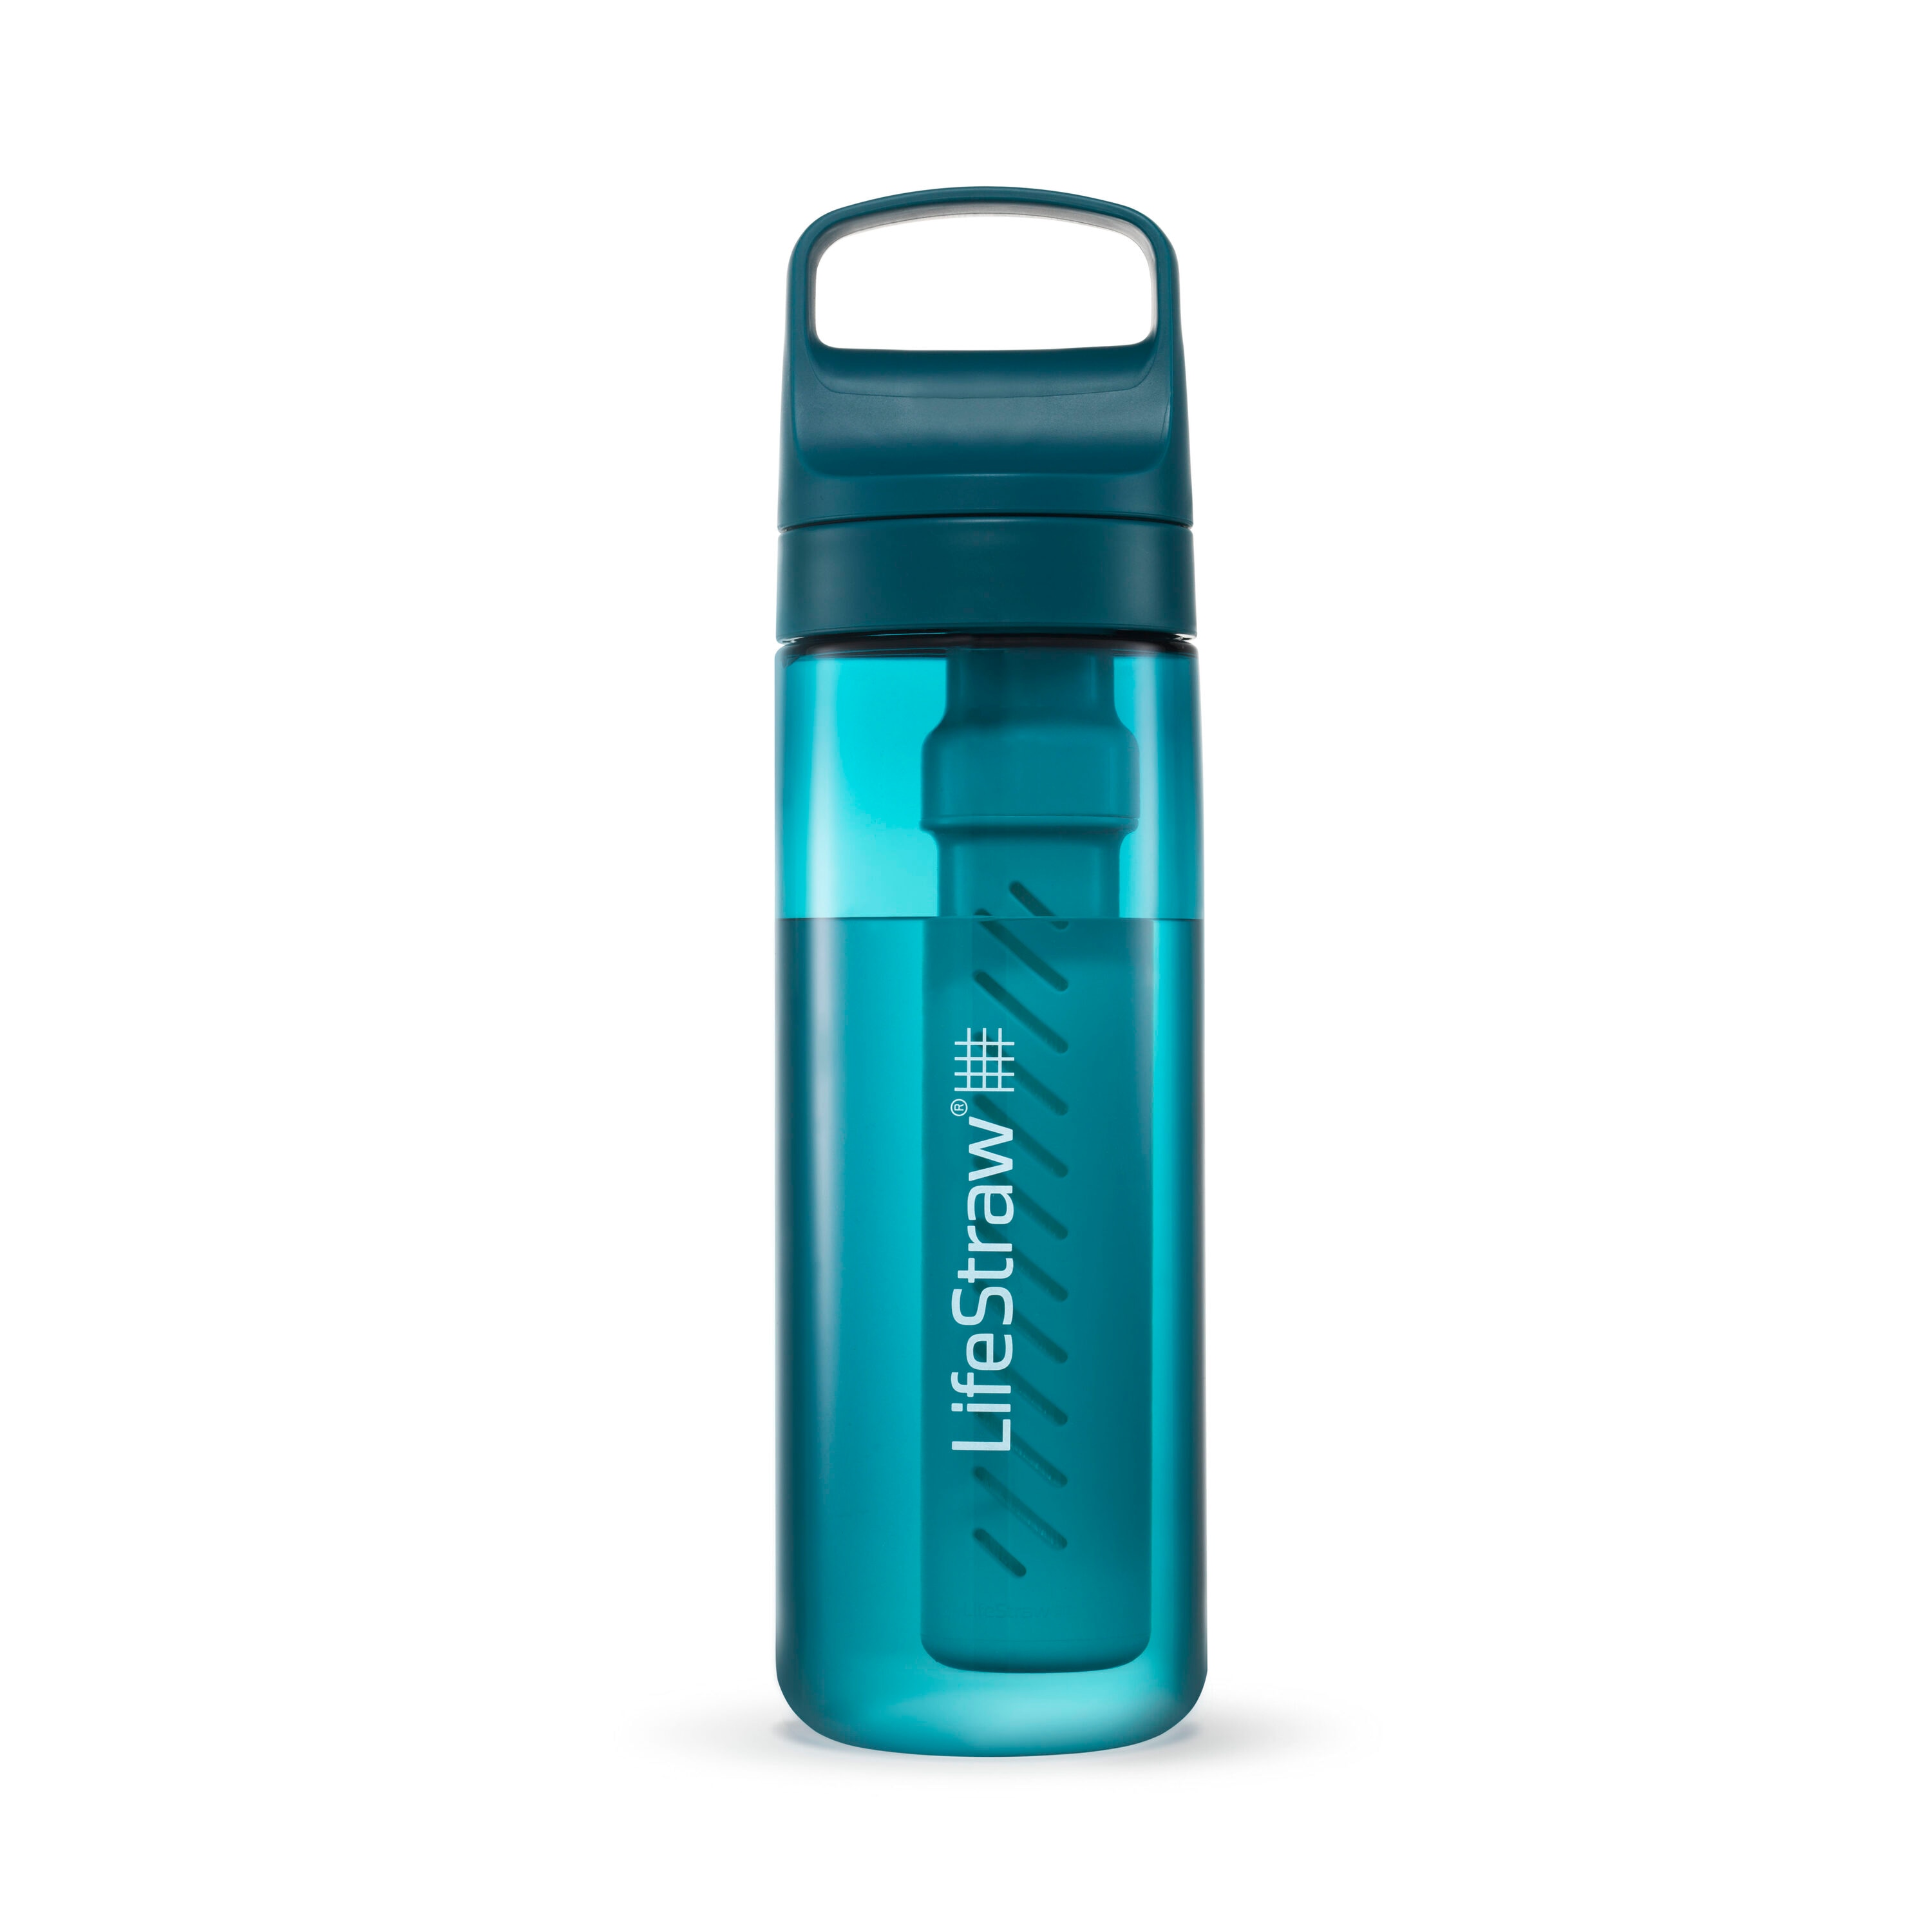 LIFESTRAW Go Water Bottle in Blue with Filter LSG201BL09 - The